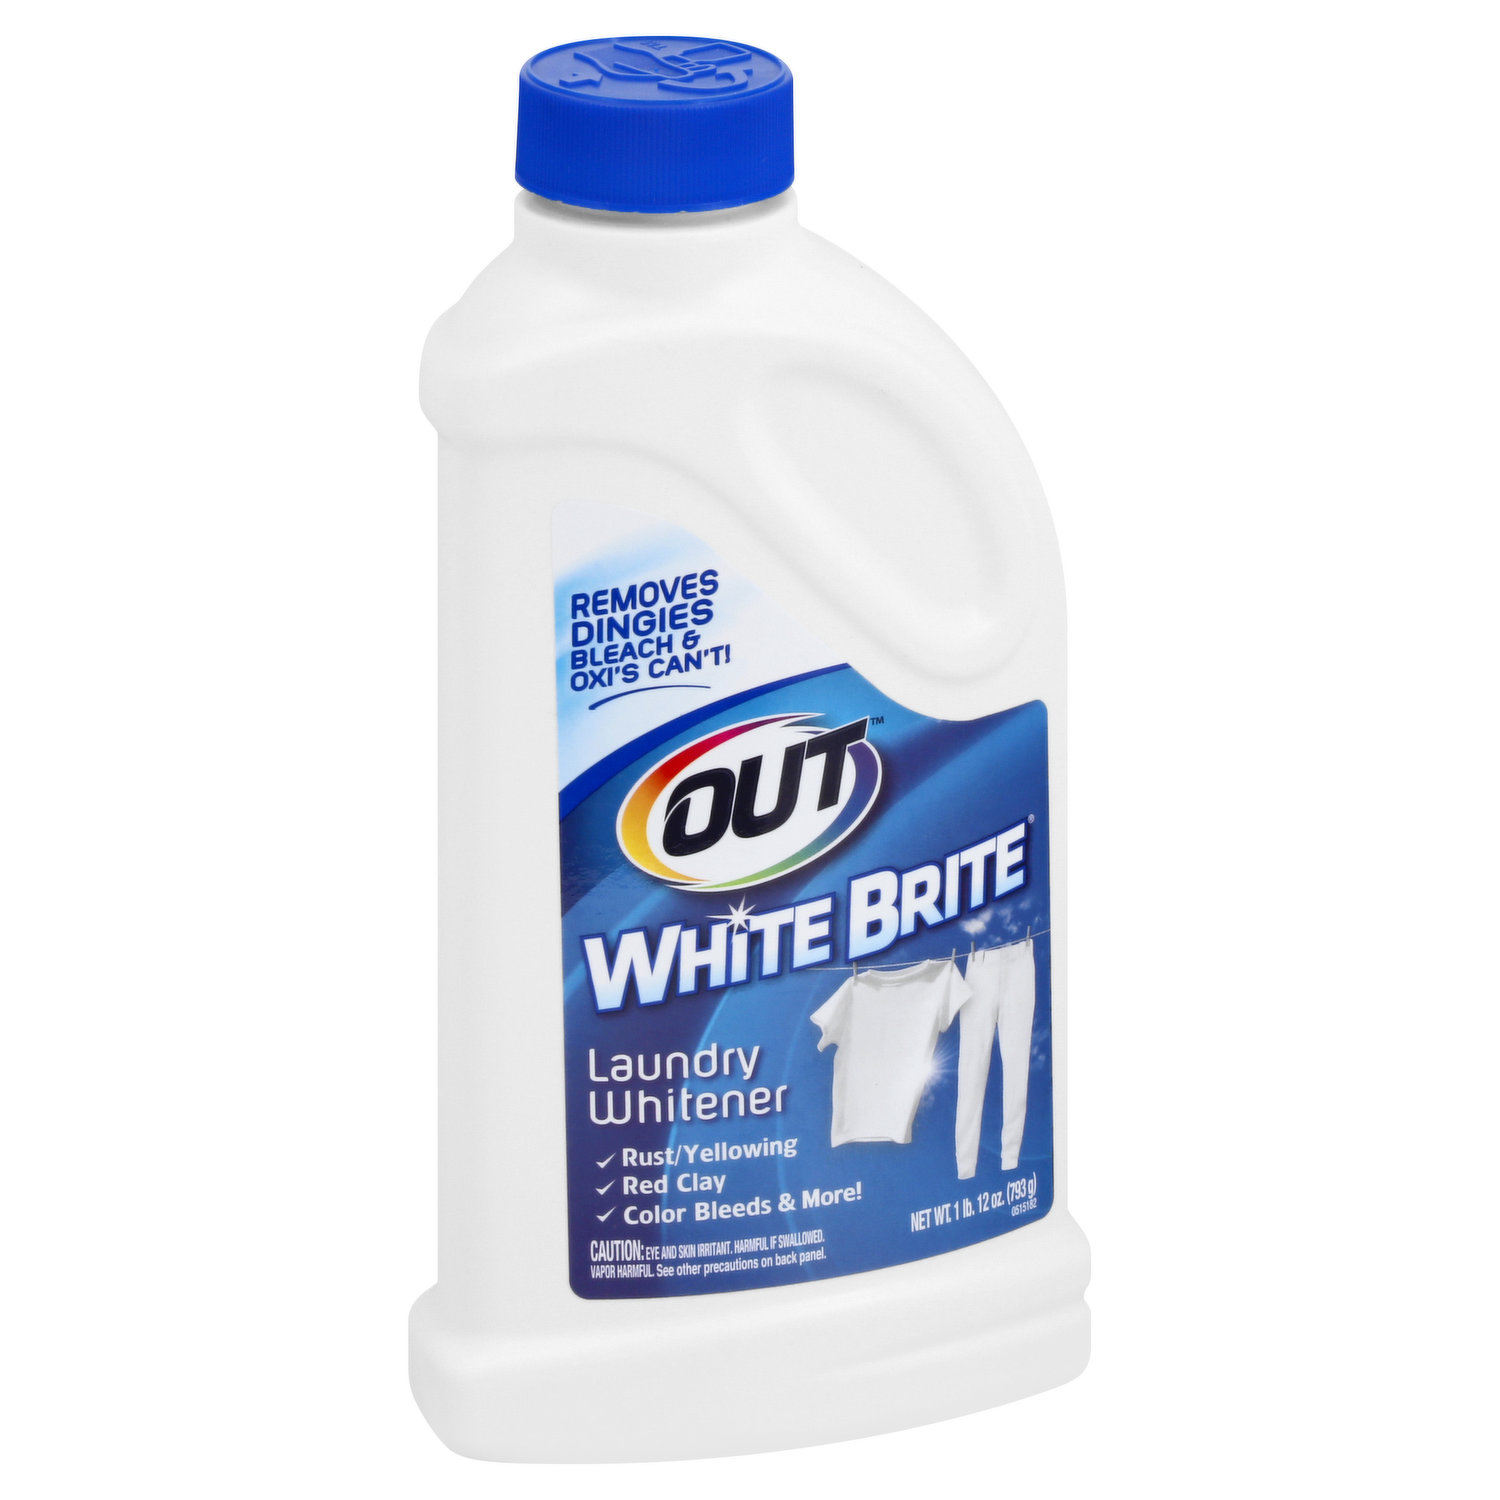 White Brite Laundry Whitener and Stain Remover - 28 oz bottle